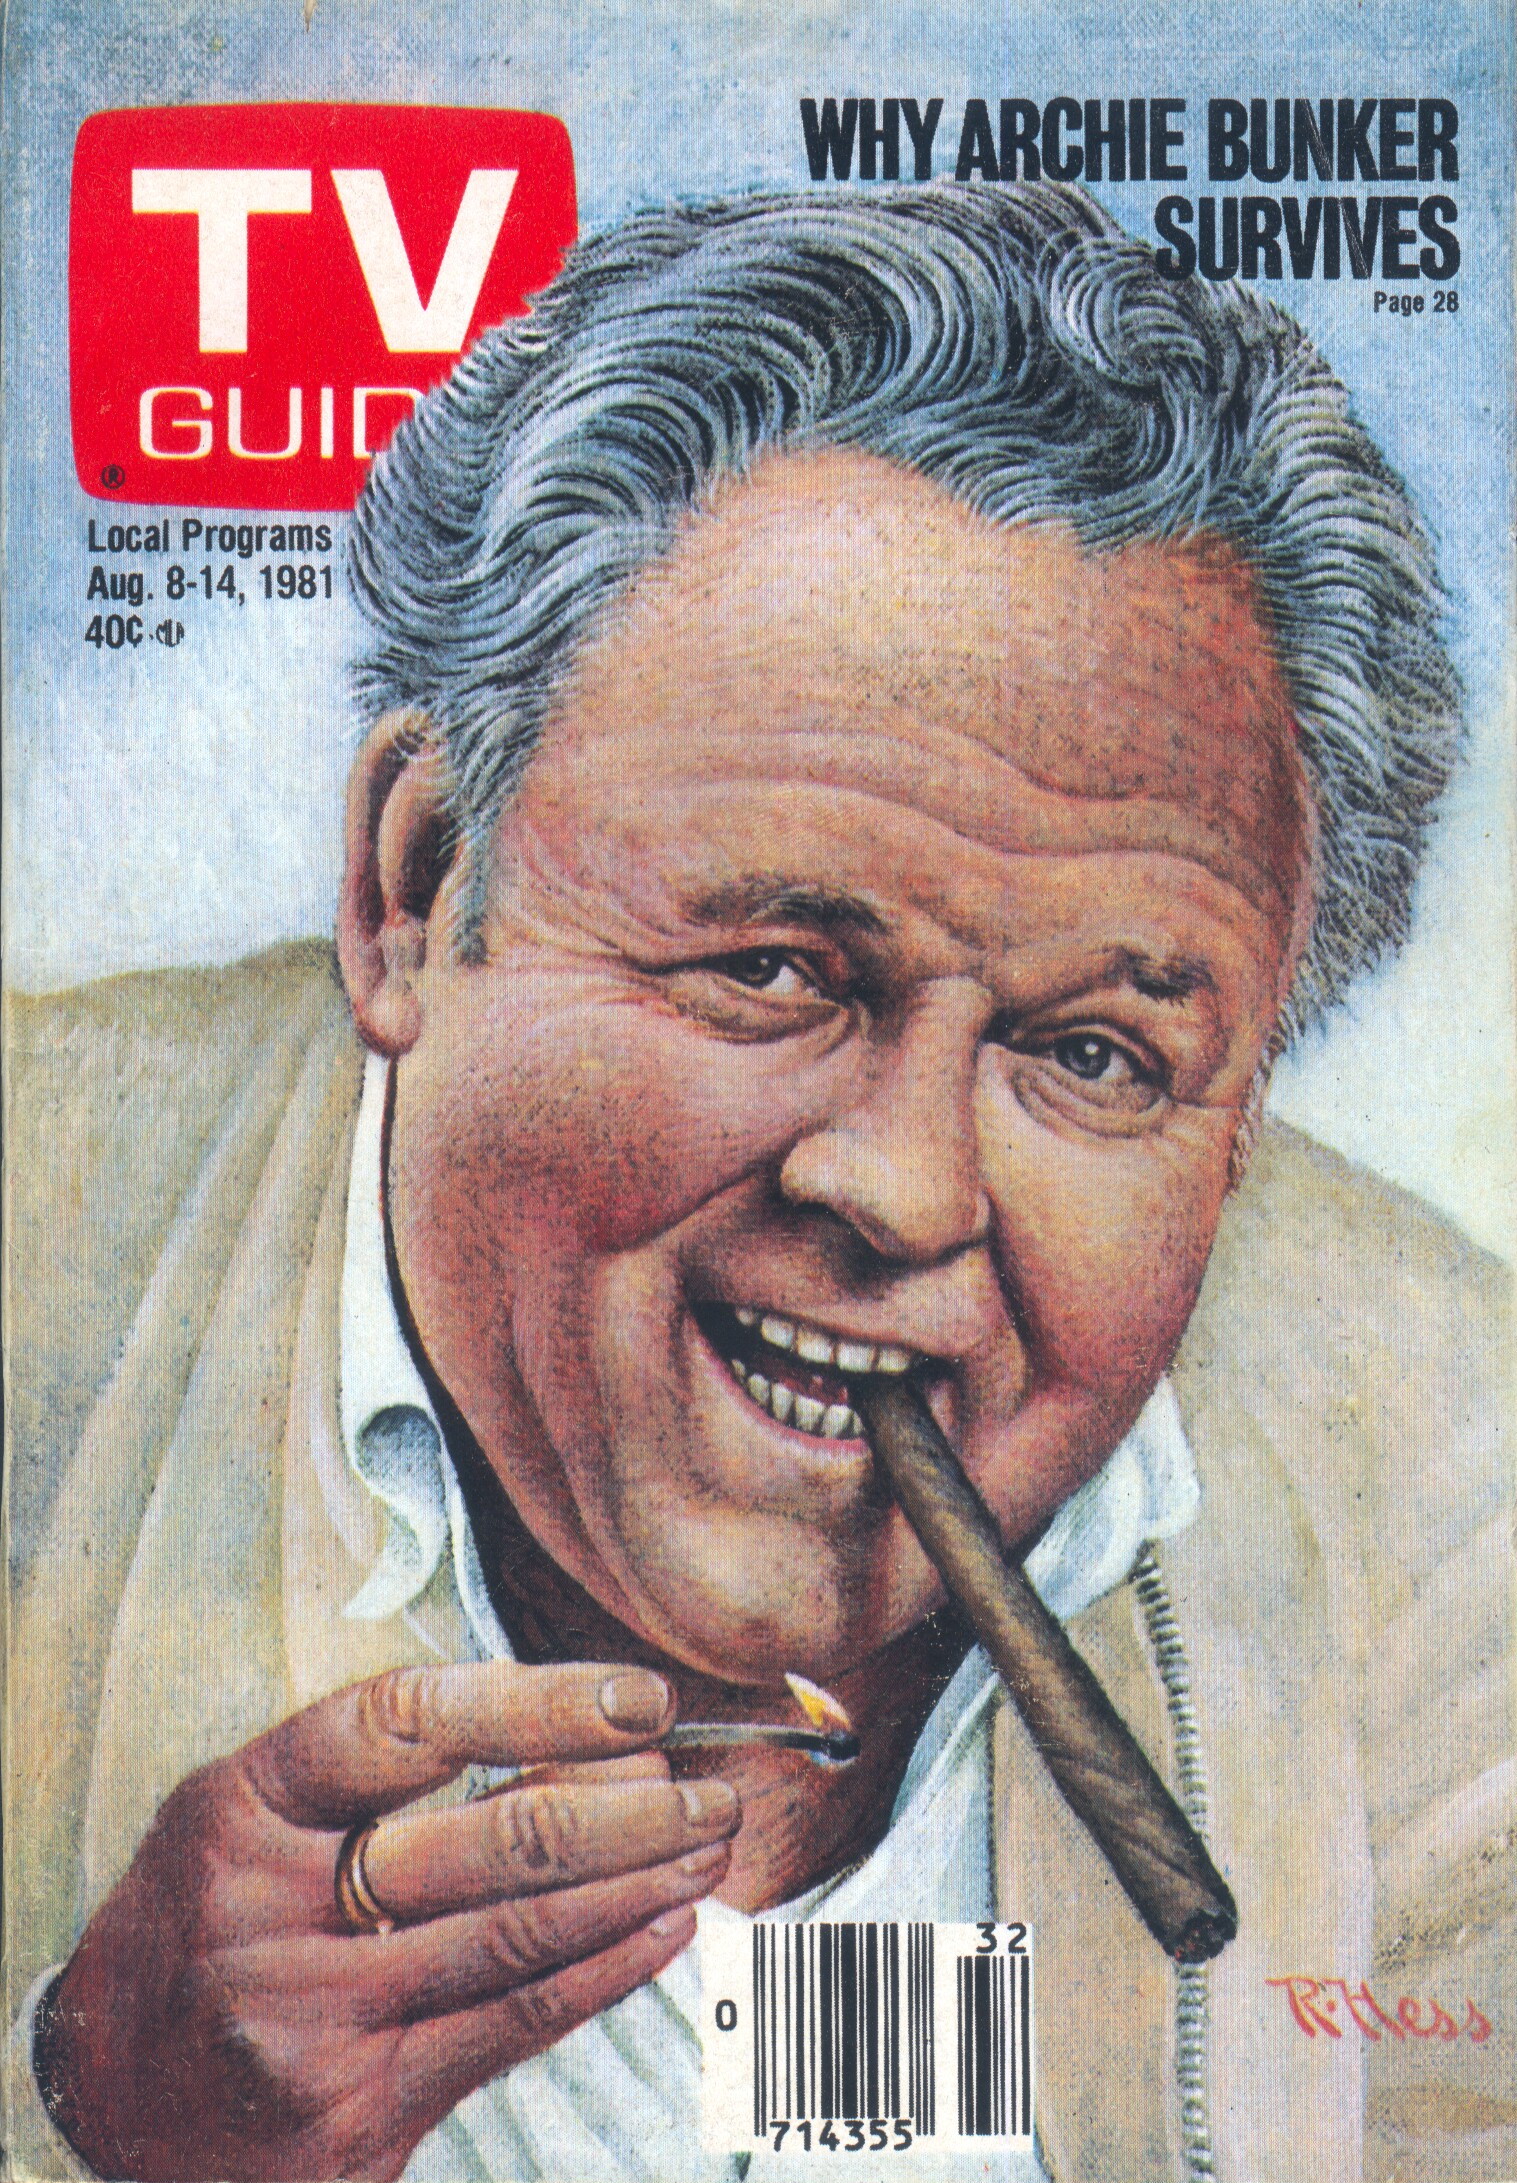 archie bunker, the way things used to be, make america great again.